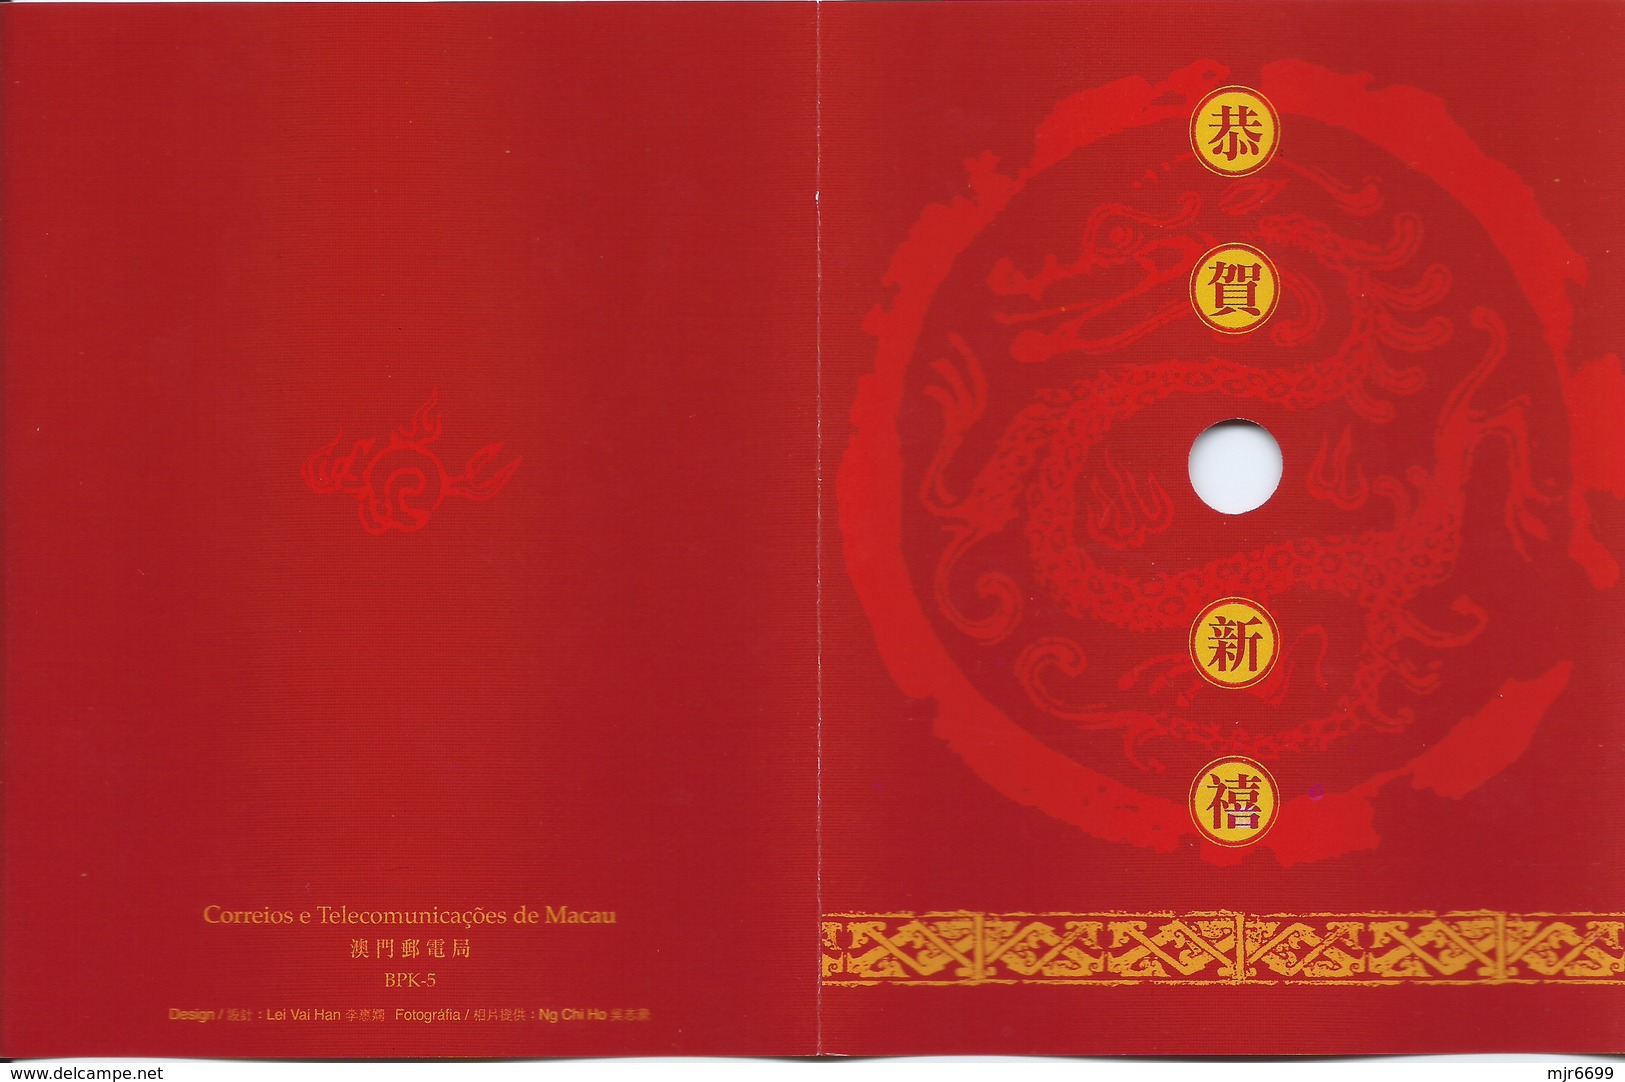 MACAU 1999 NEW YEAR GREETING CARD & POSTAGE PAID COVERLOCAL USAGE, POST OFFICE CODE #BPK005 - Ganzsachen